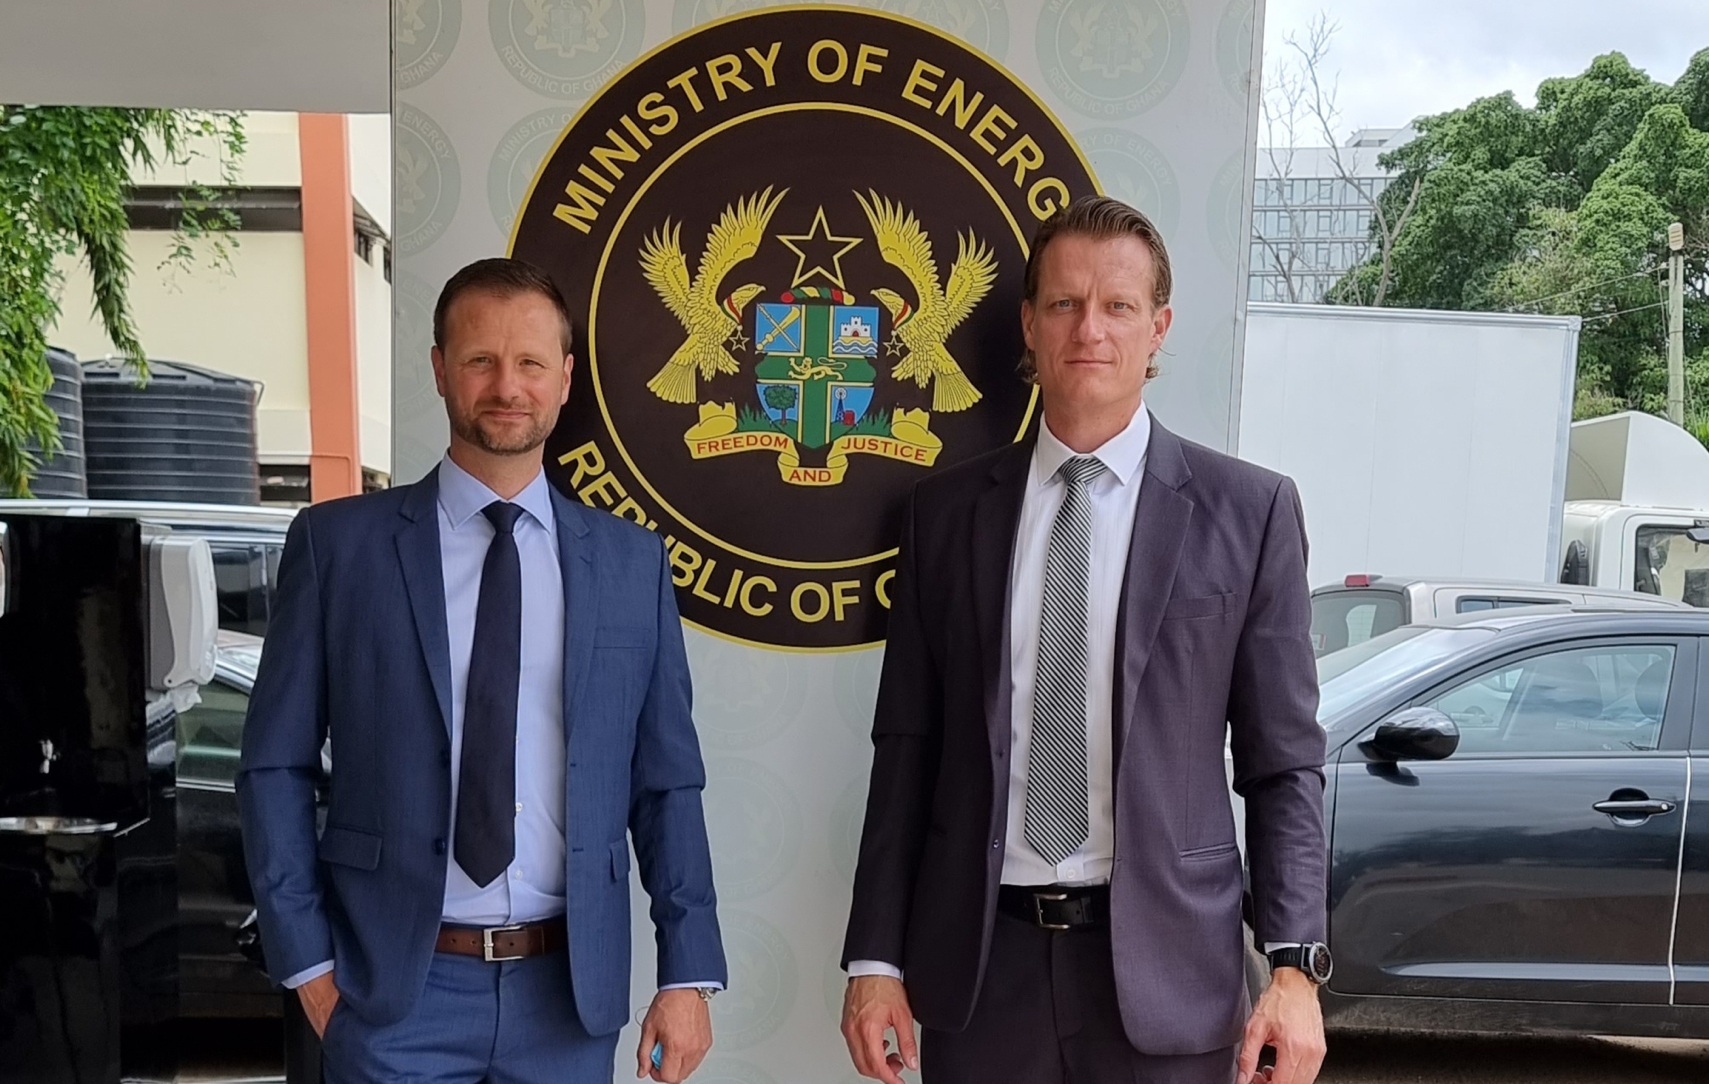 Ministry of energy, Mads and Mikkel